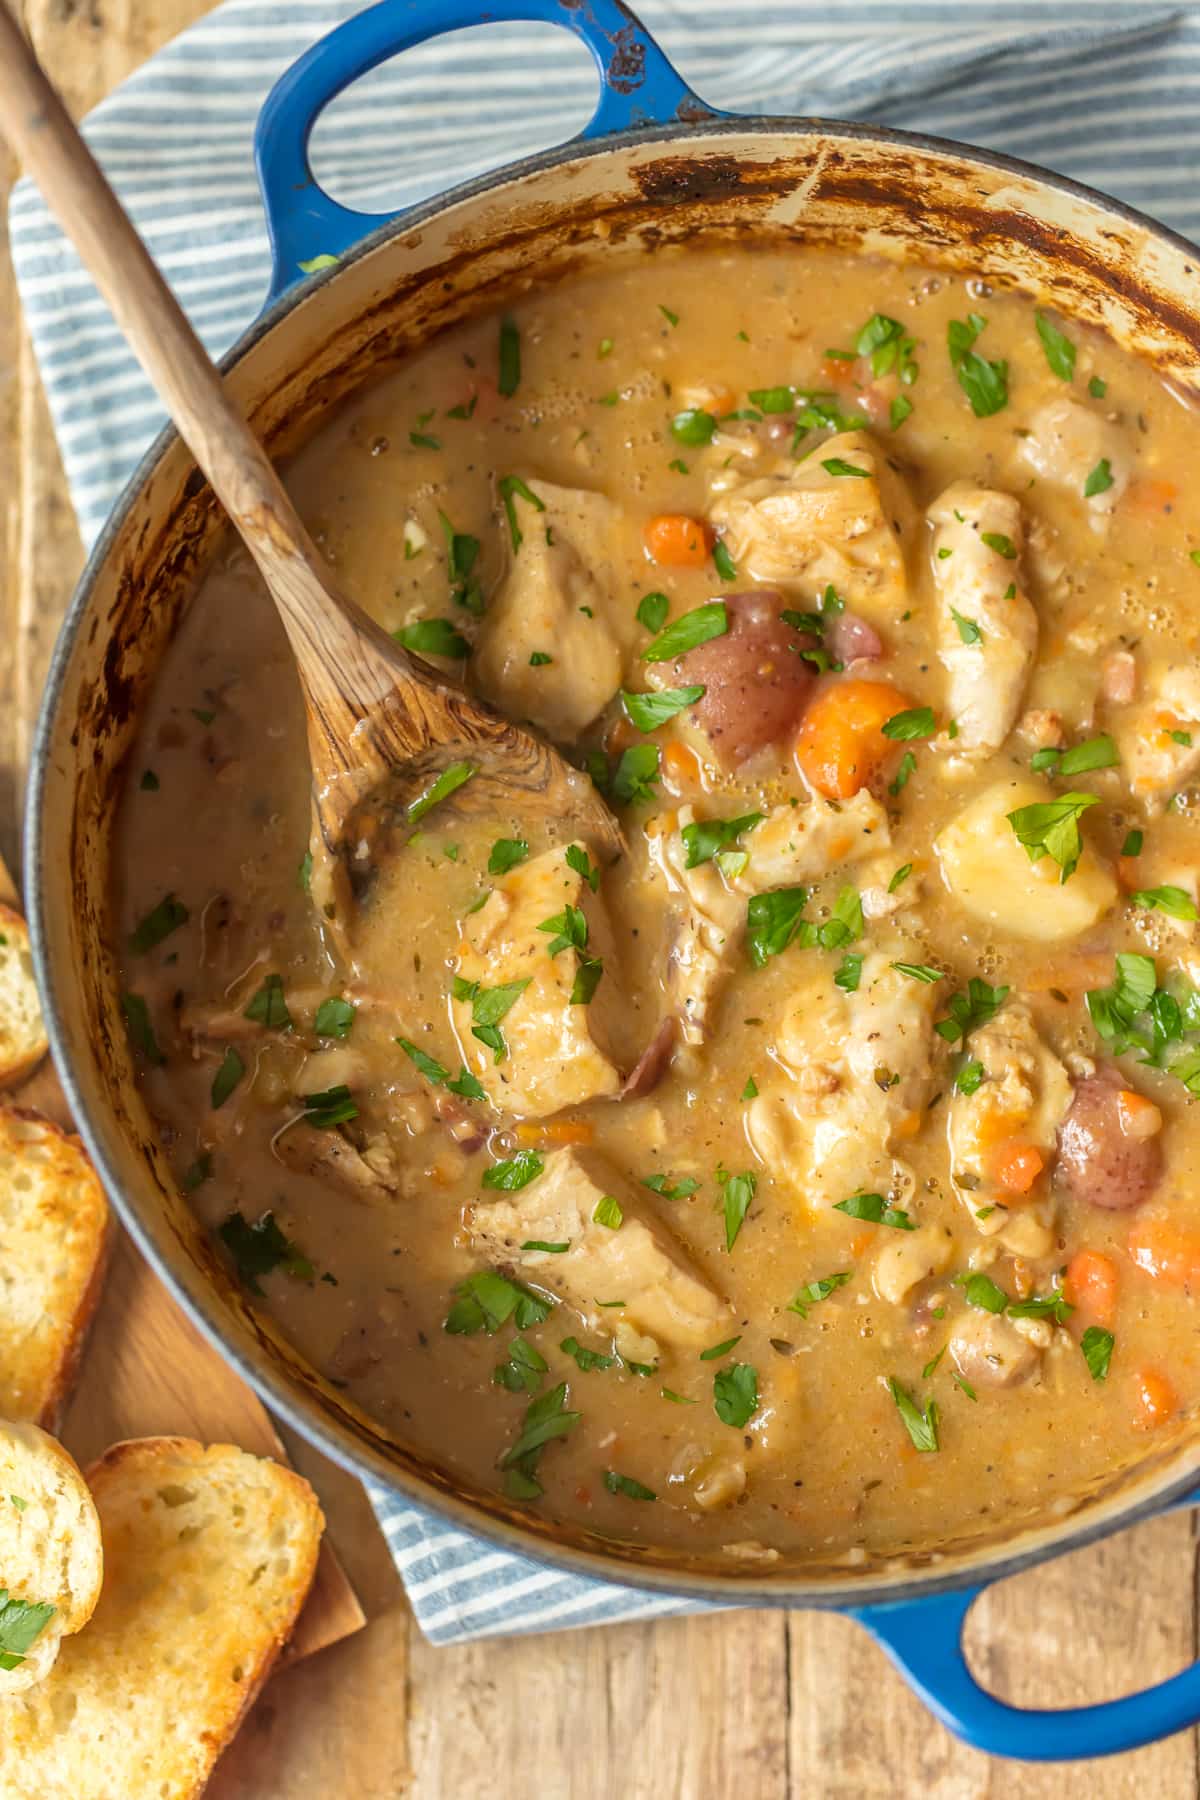 Chicken stew recipe with potatoes, carrots, white wine, and more